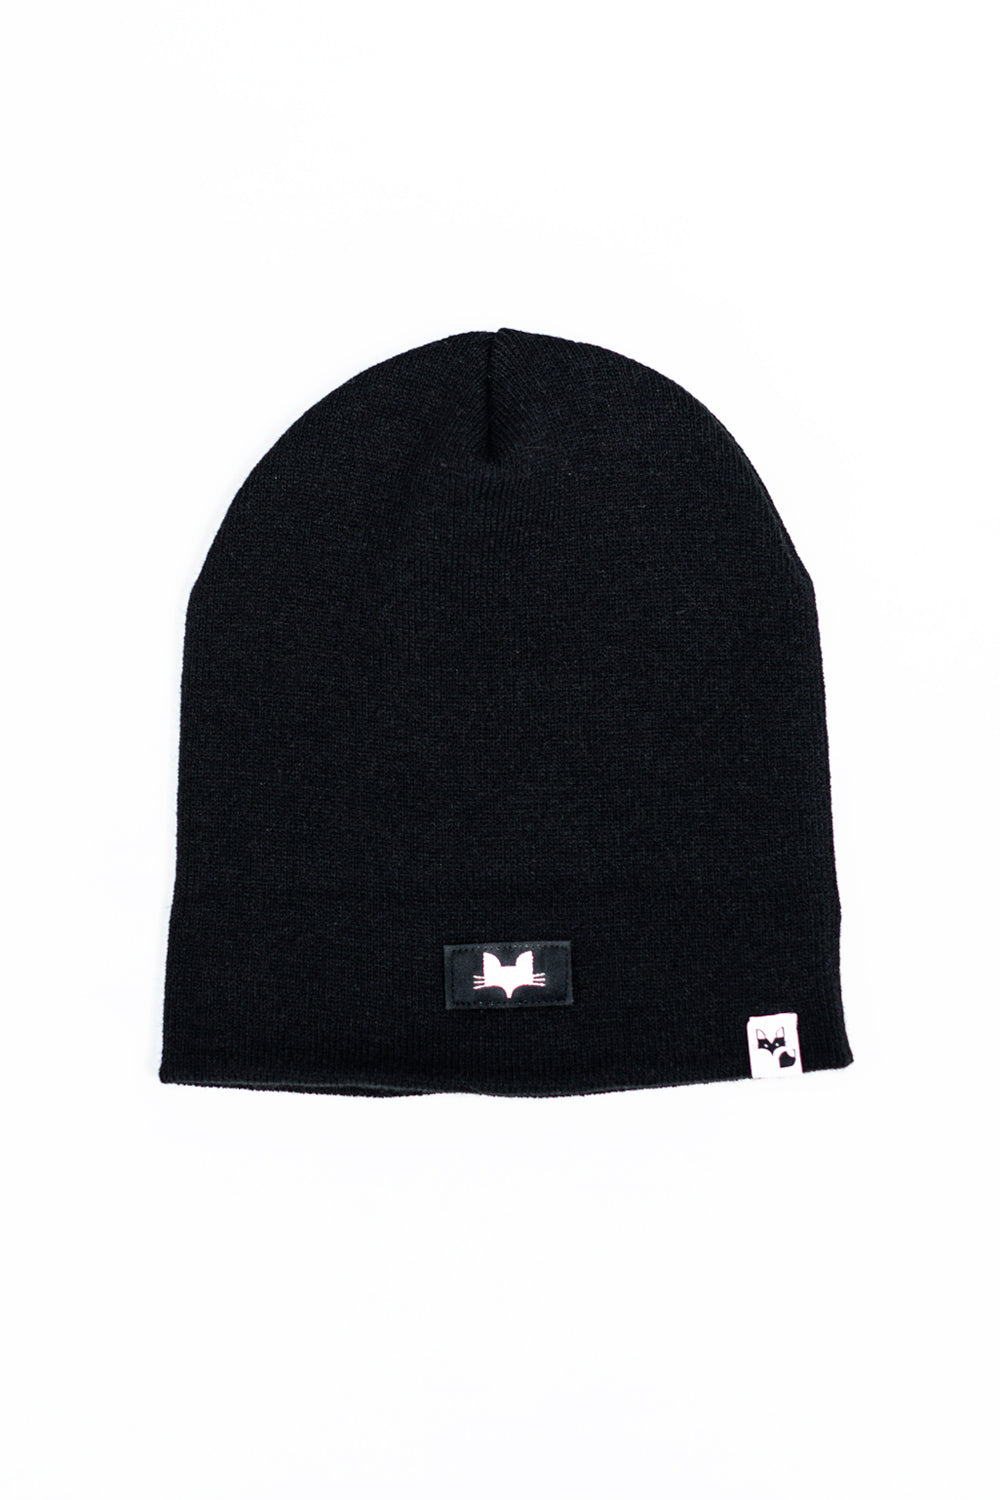 One size black beanie hat with logo small fox head design label detail